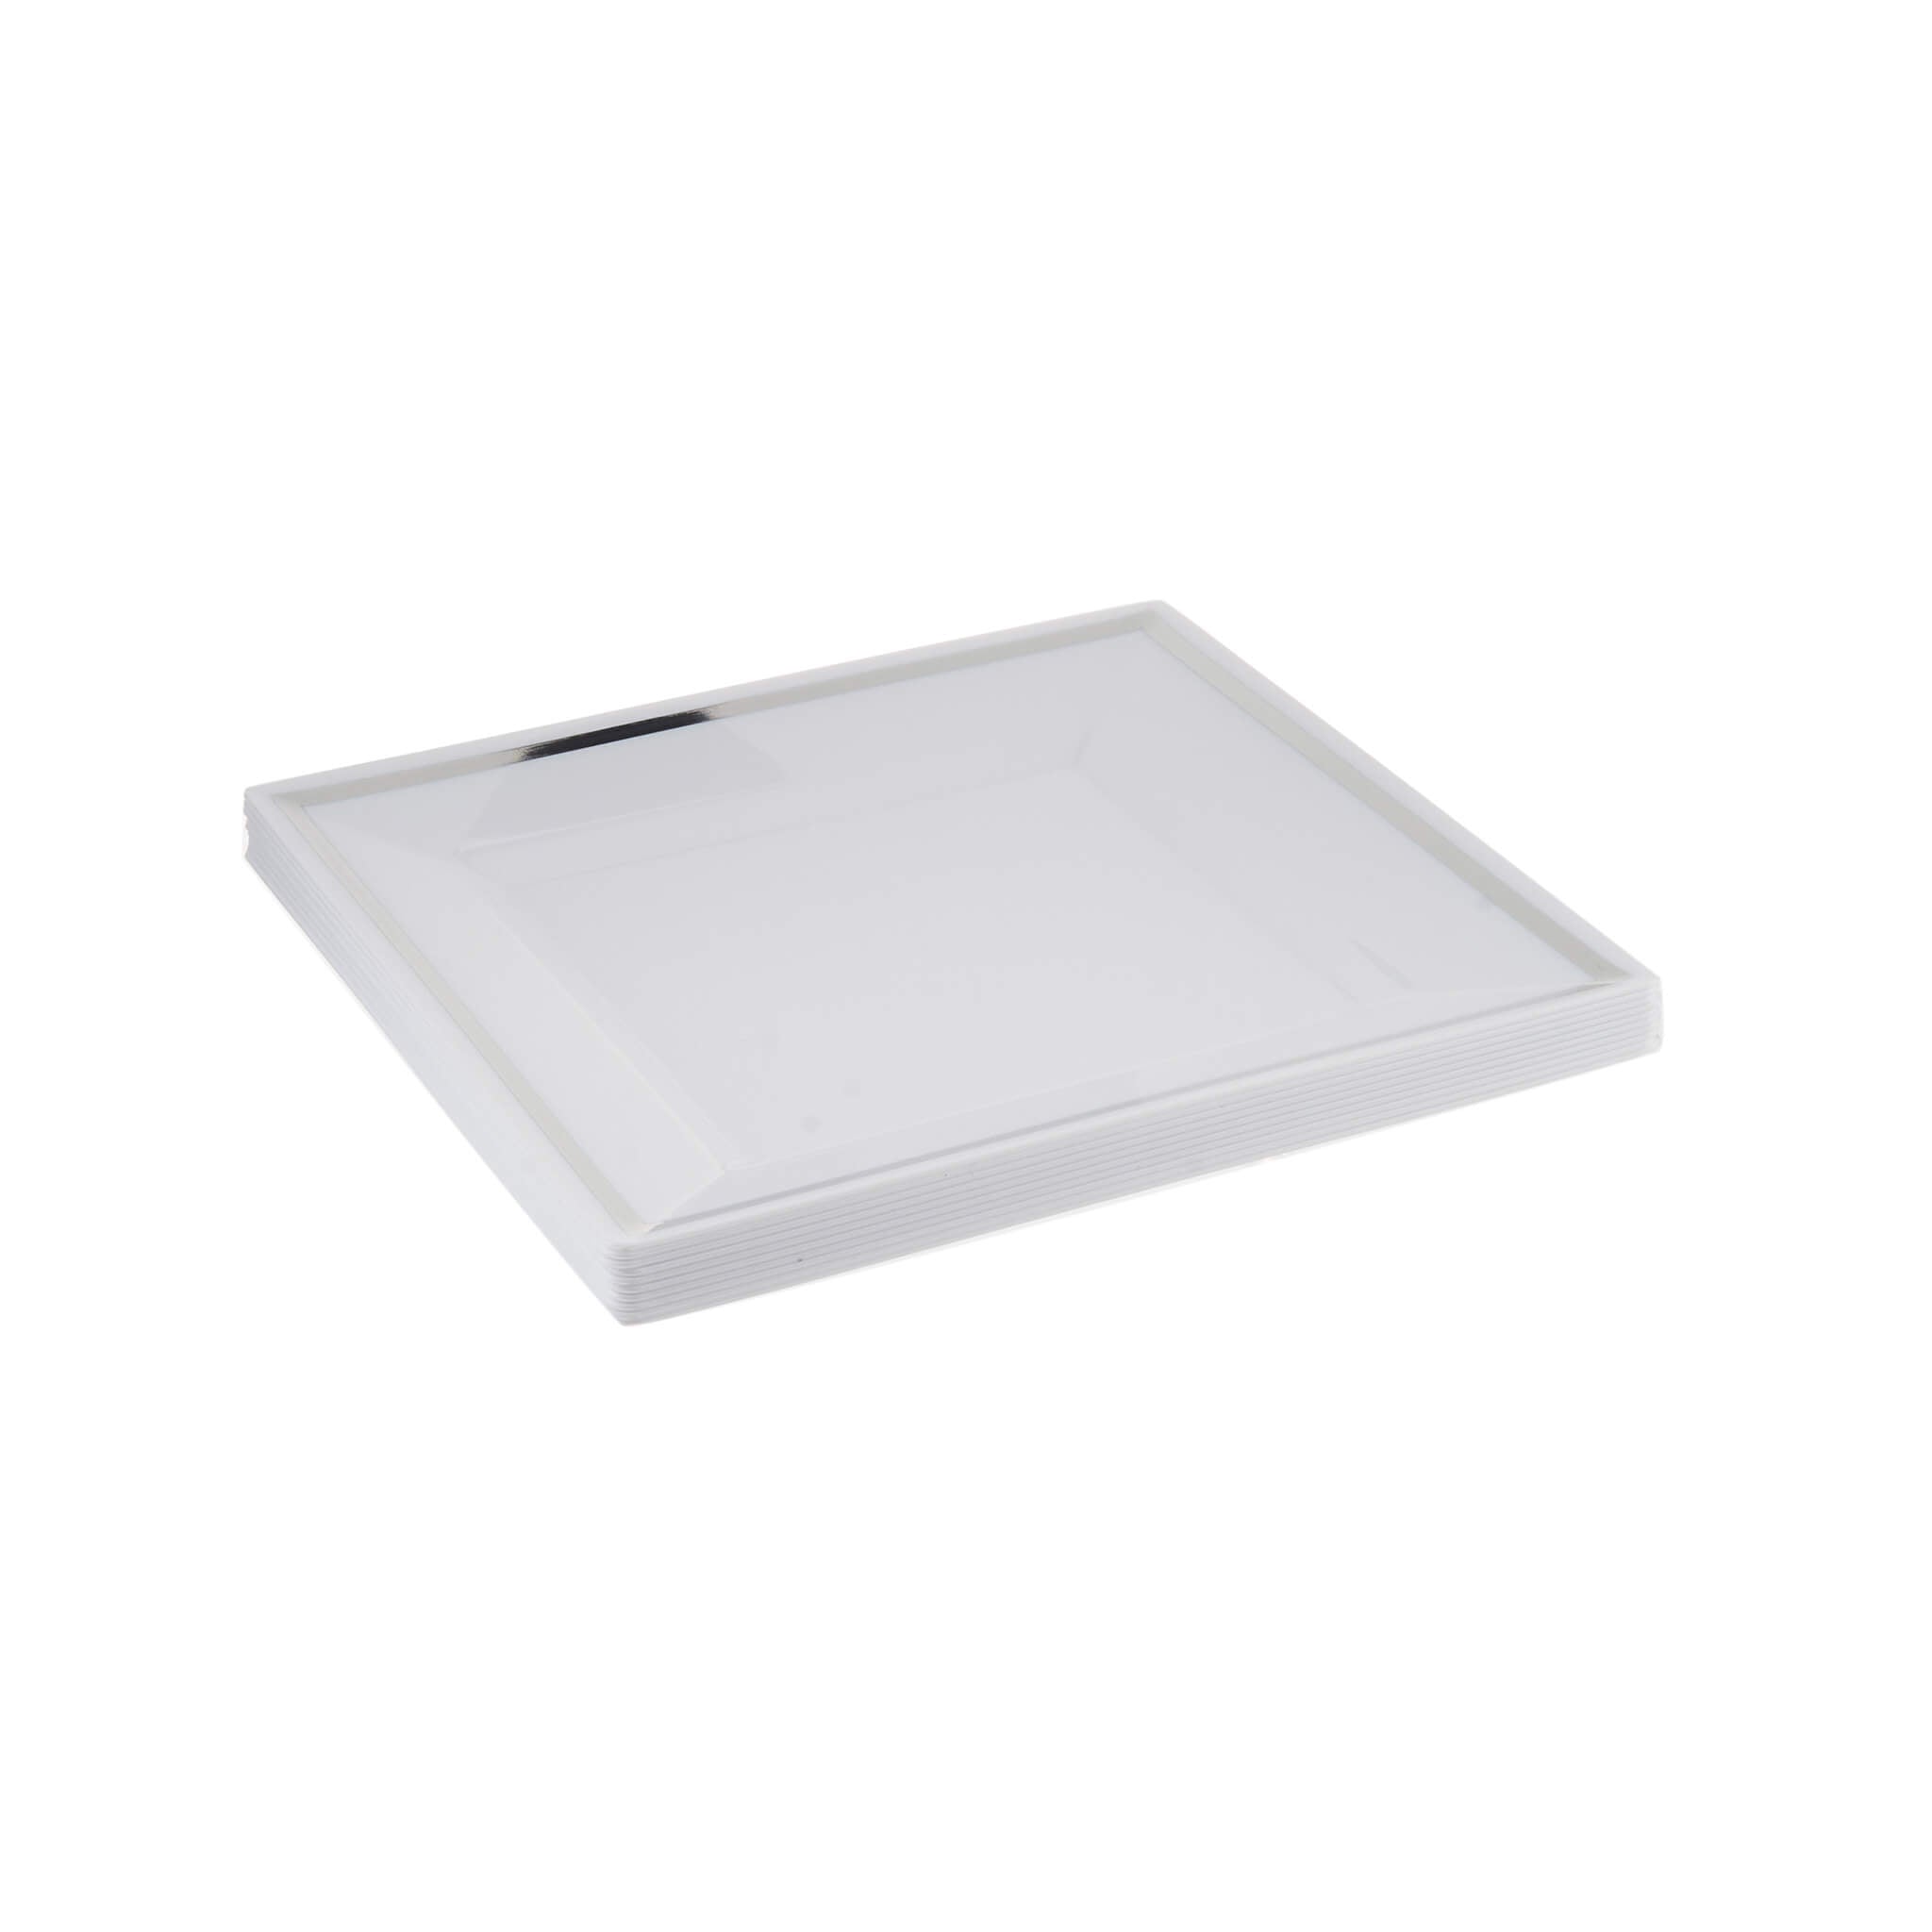 White Square Plate With Silver Rim Design 10 Pieces - Hotpack Global